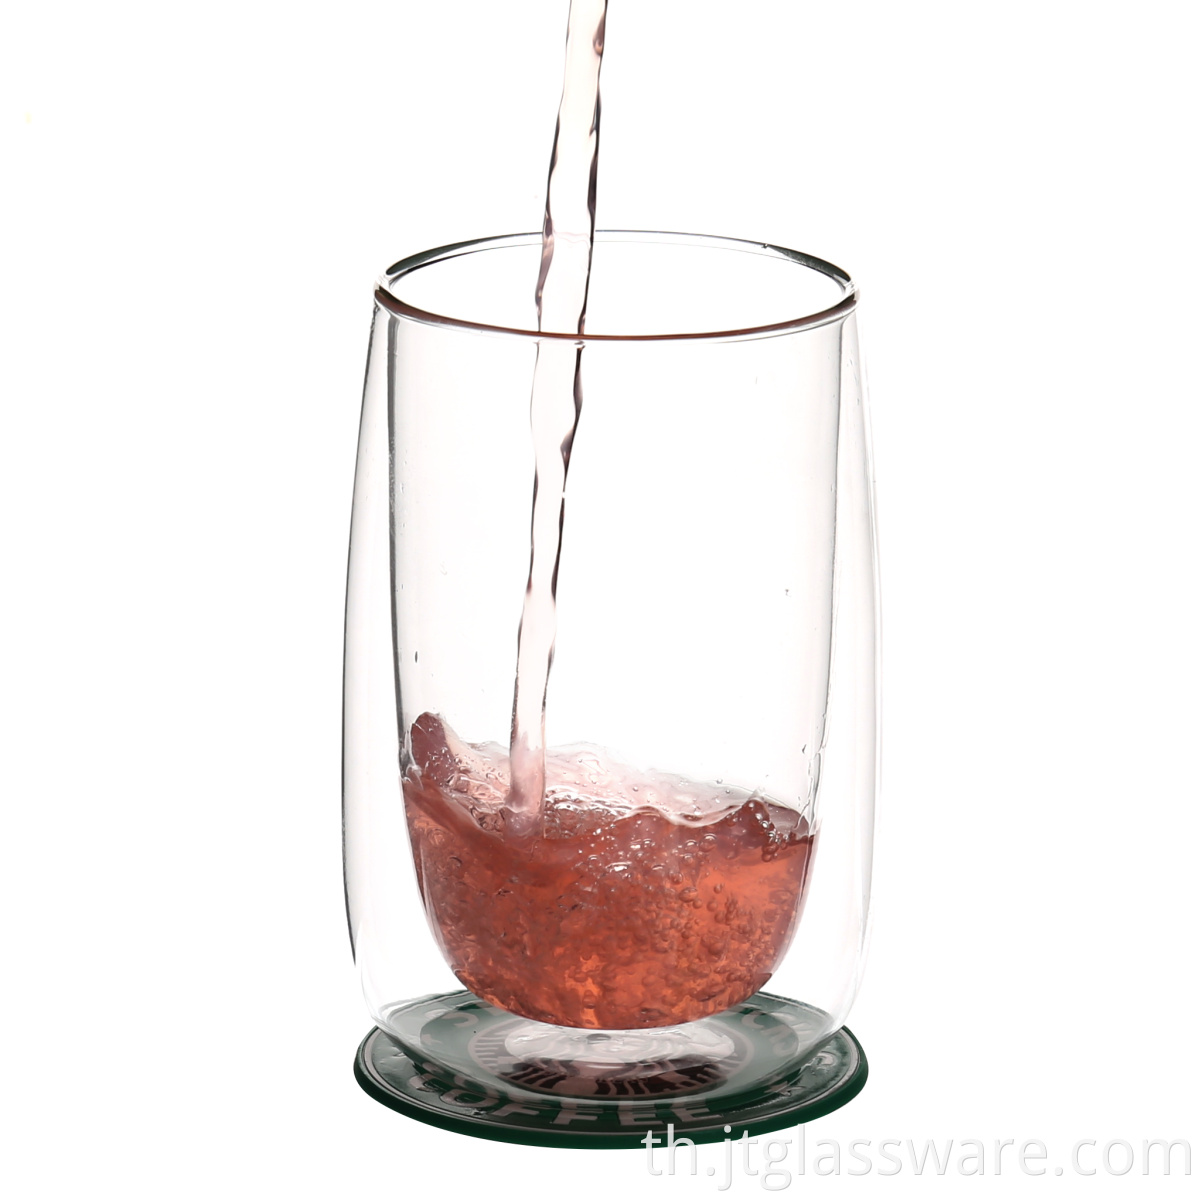 soft drinking glass cup